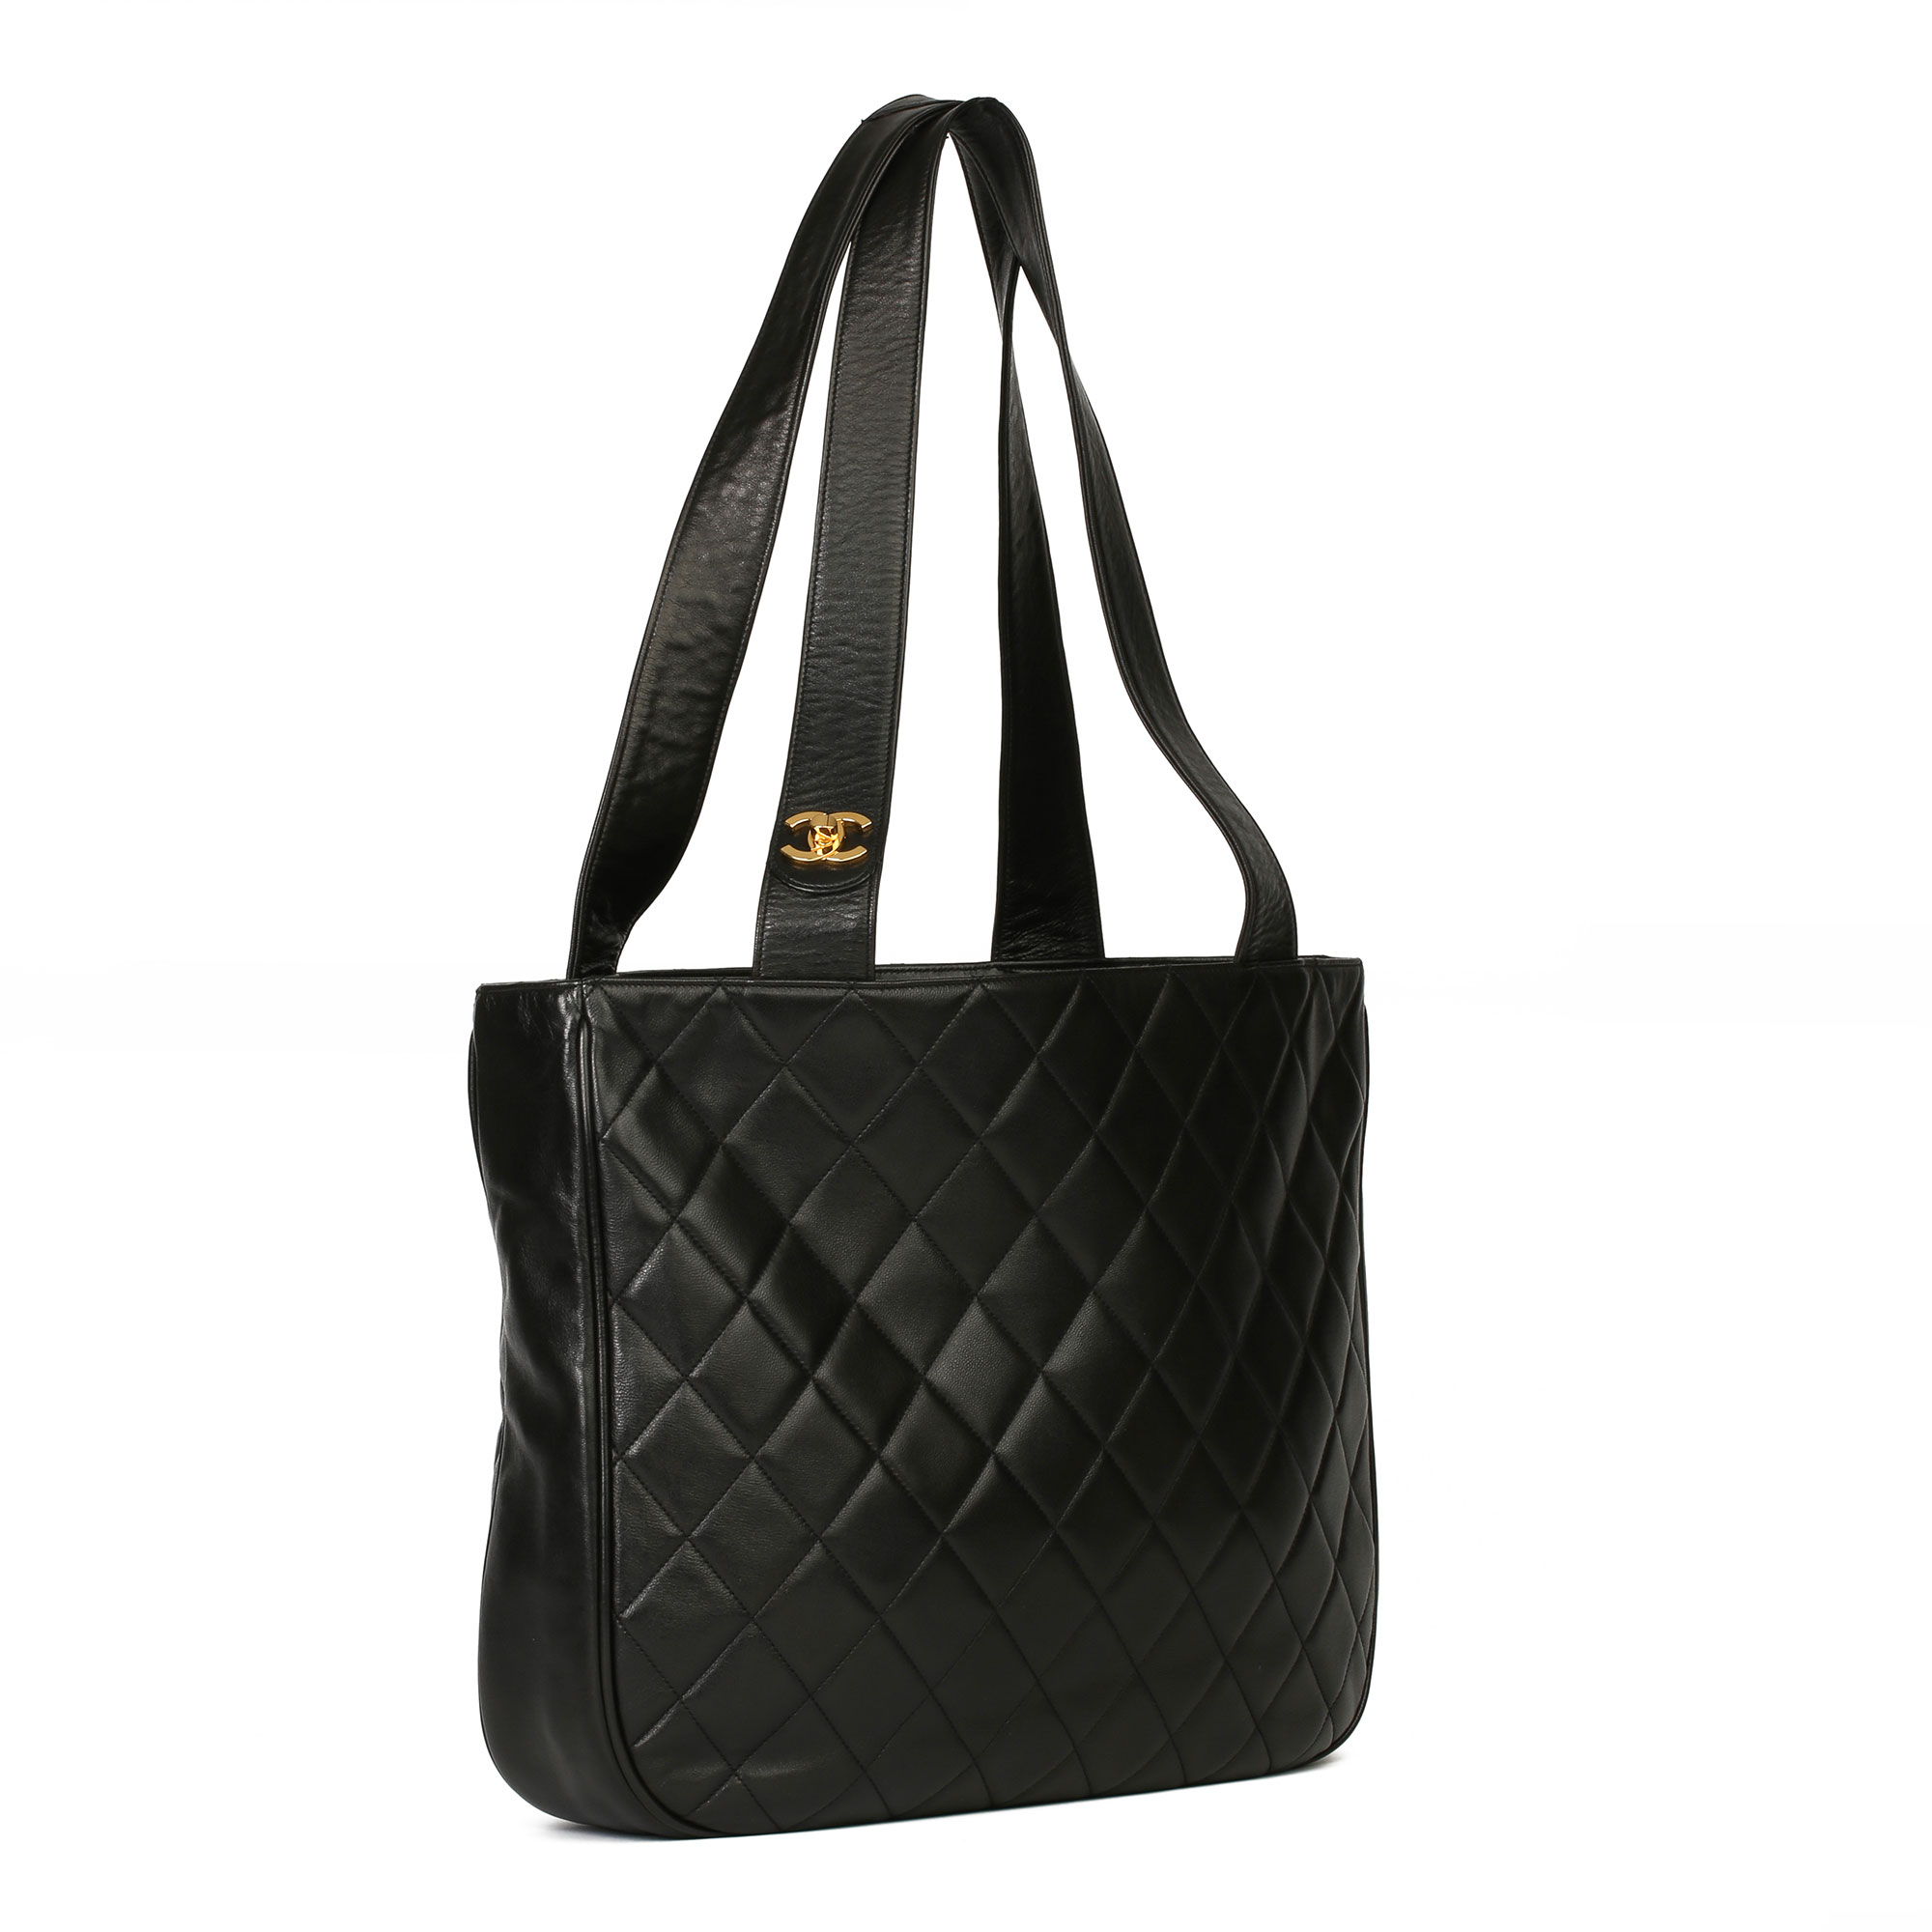 Chanel Black Quilted Lambskin Vintage Classic Shoulder Tote - Image 13 of 13